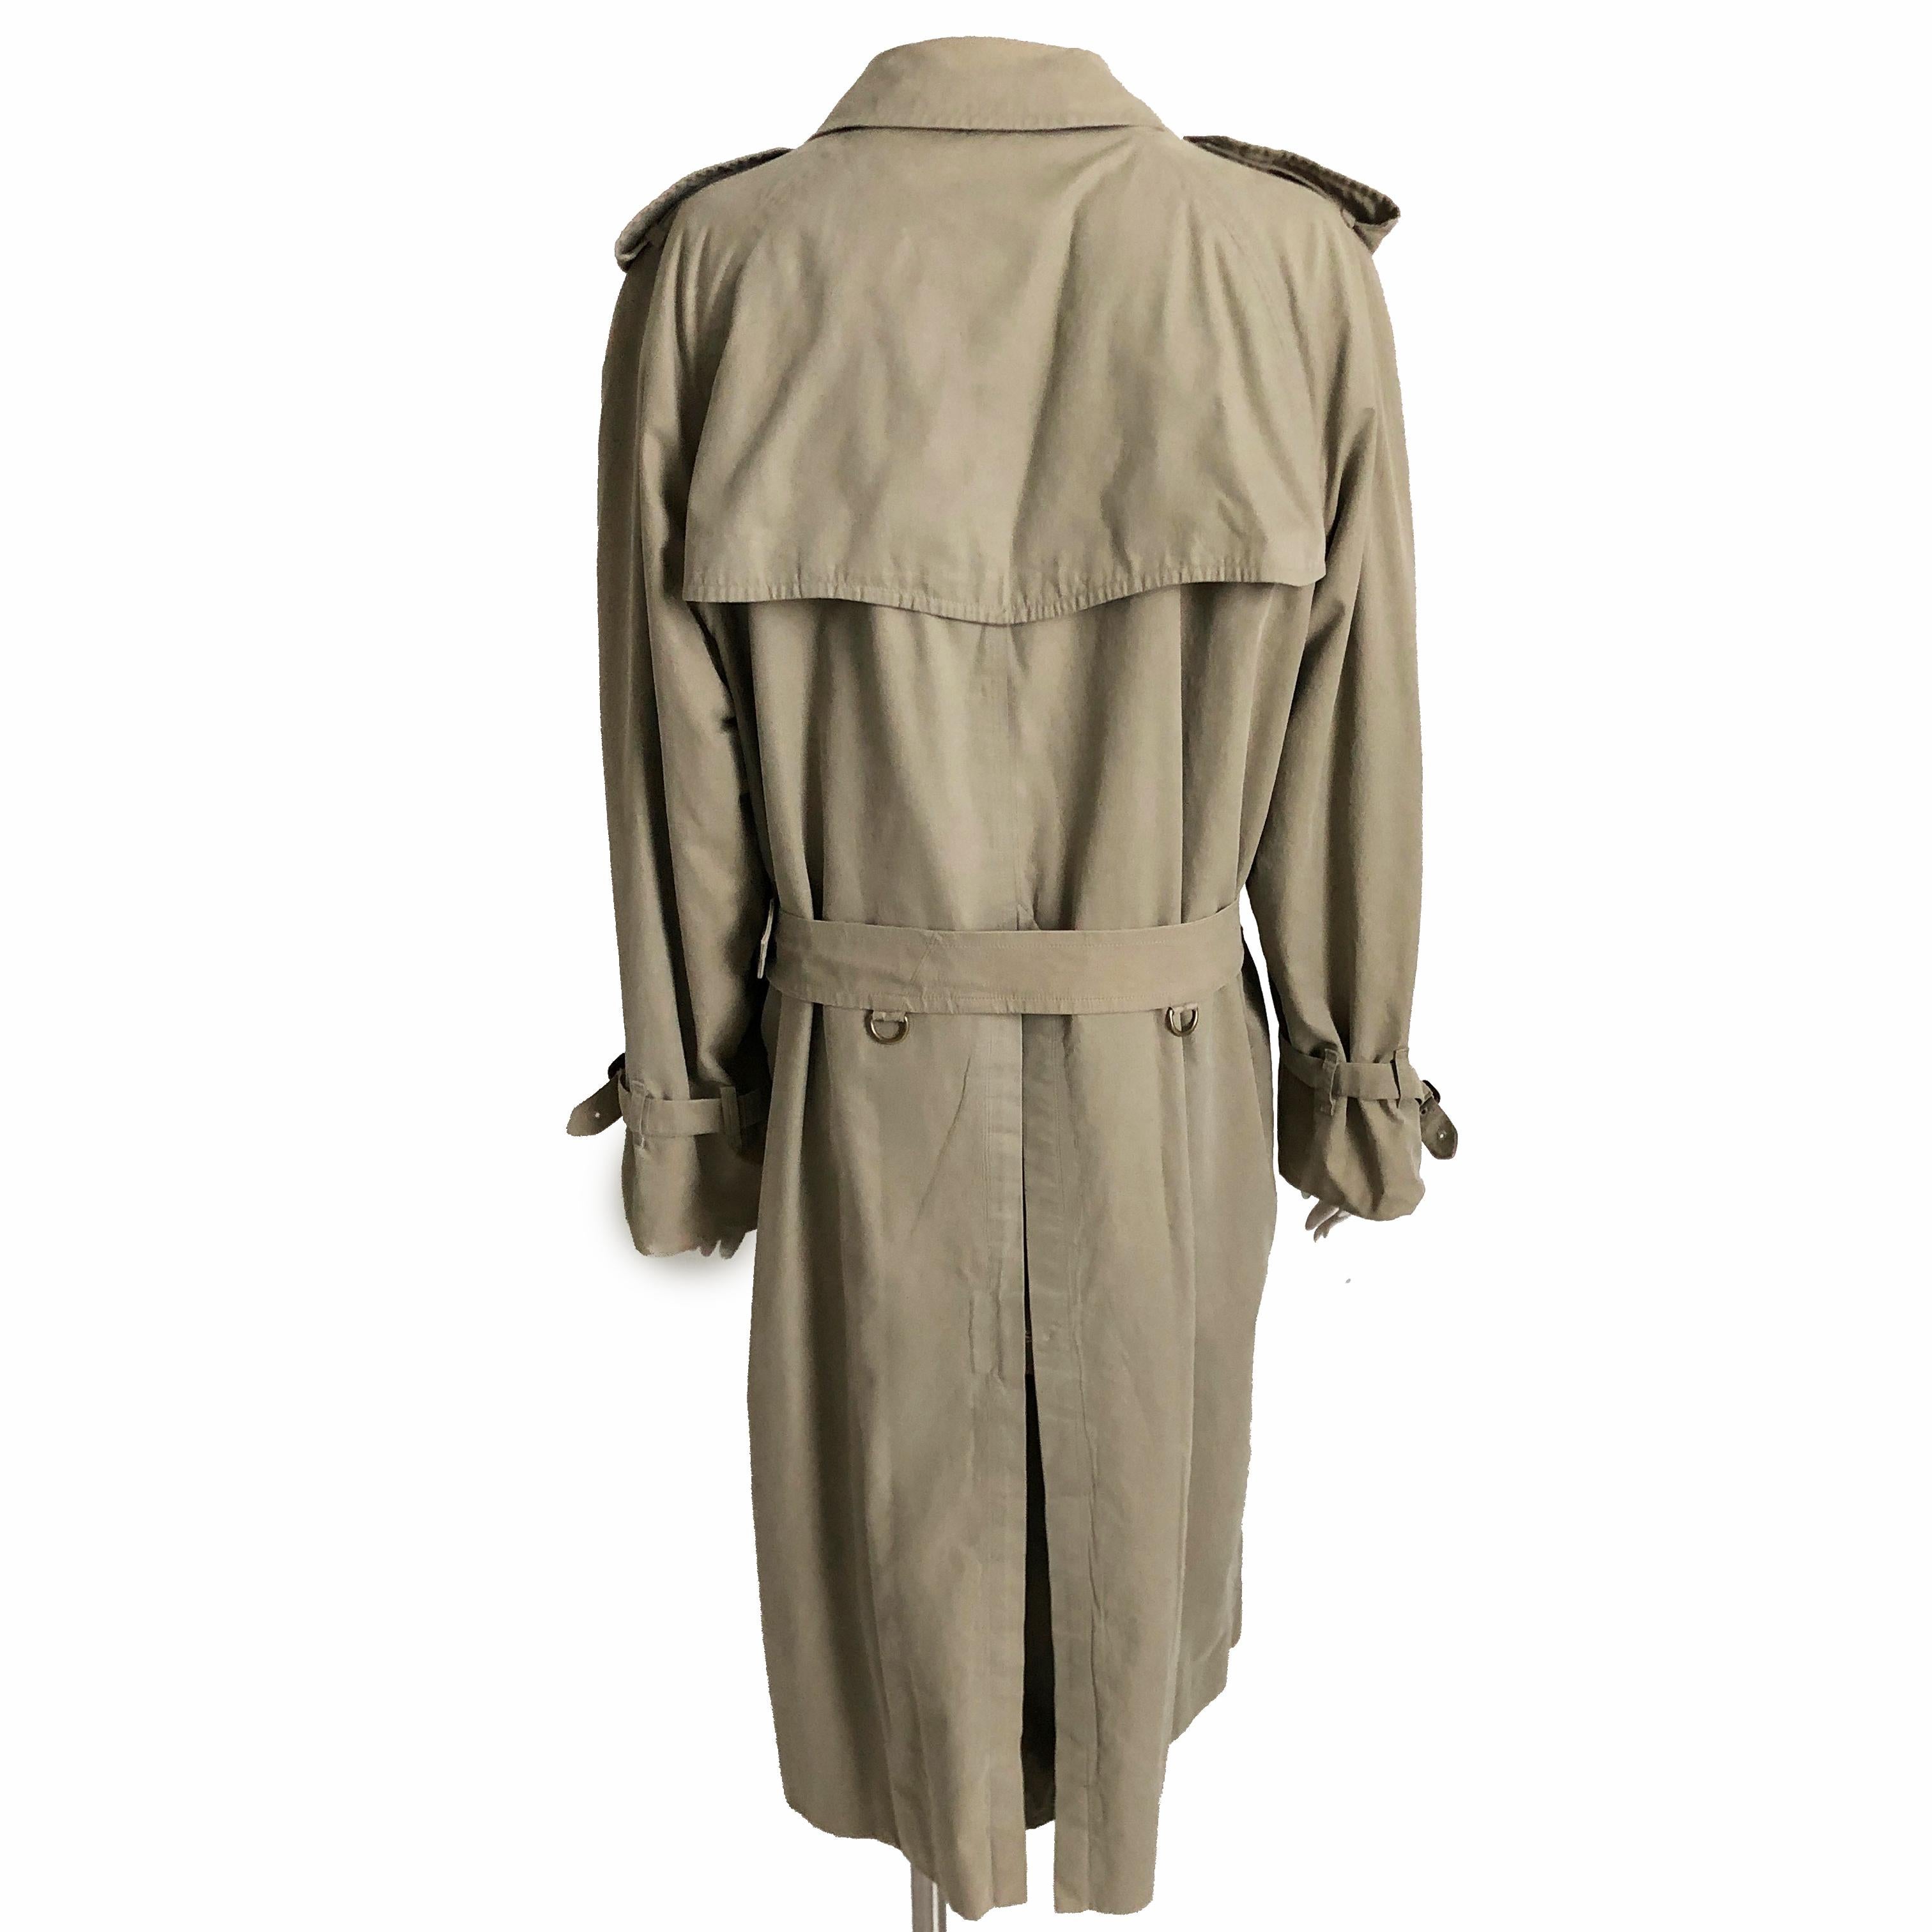 Burberry Classic Trench Coat with Belt Mens Vintage Outerwear Sz 